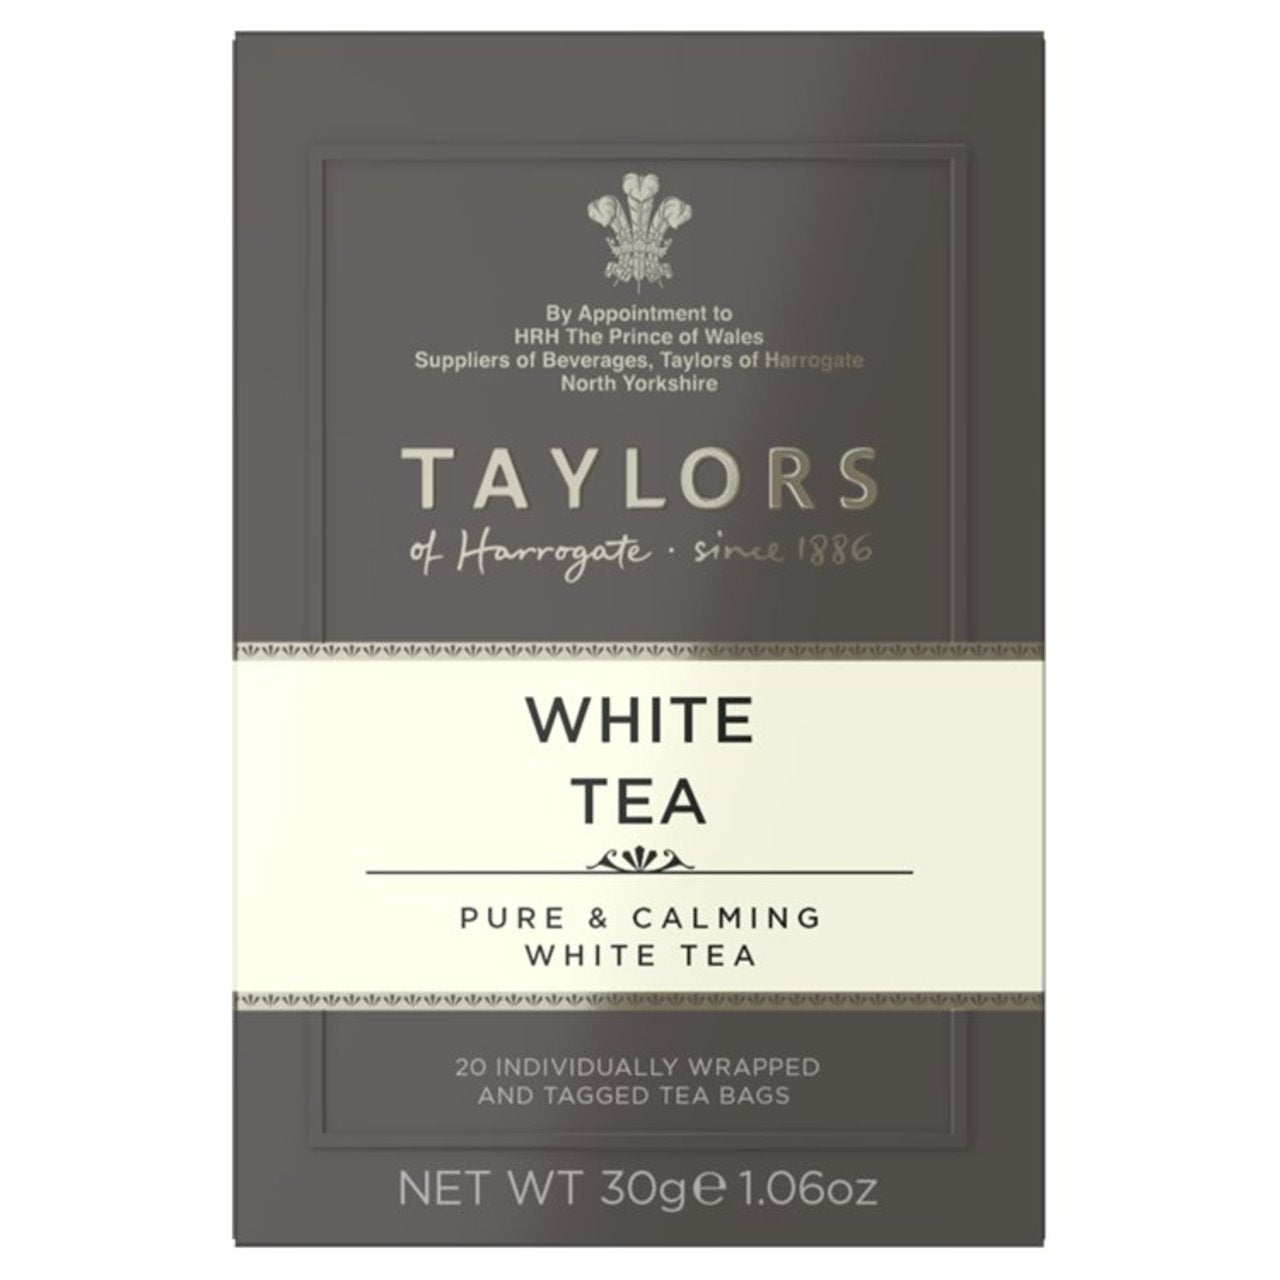 White Tea - The Great Yorkshire Shop